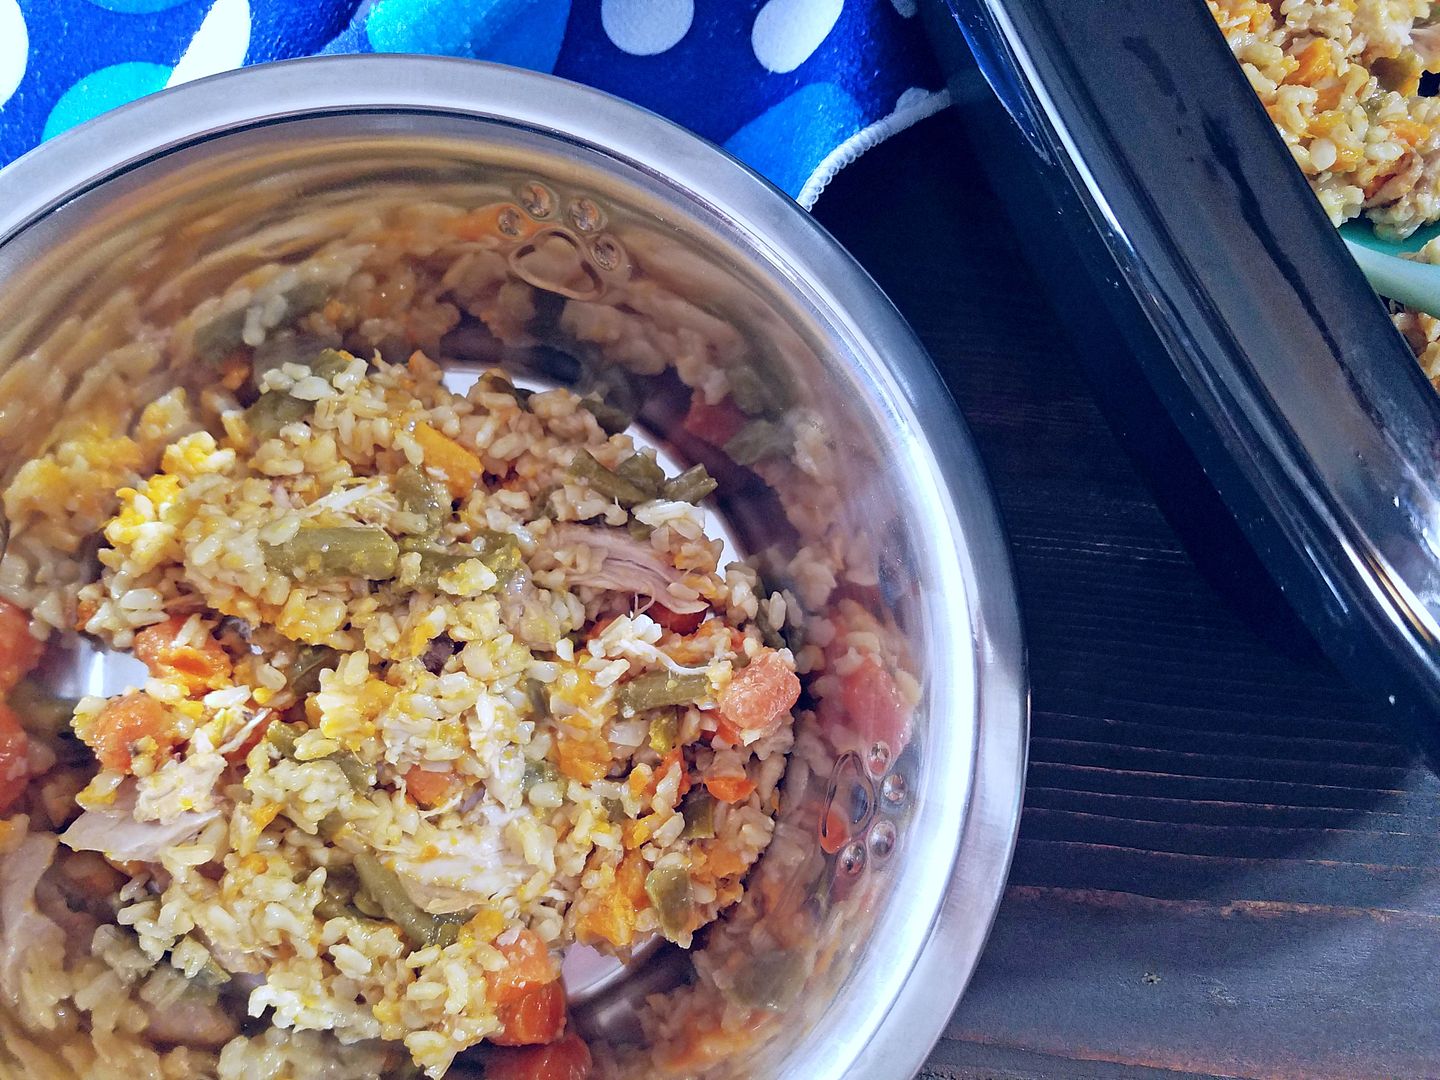 Thinking about making homemade dog food but aren't sure you have the time? This crockpot chicken recipe is a great place to start!